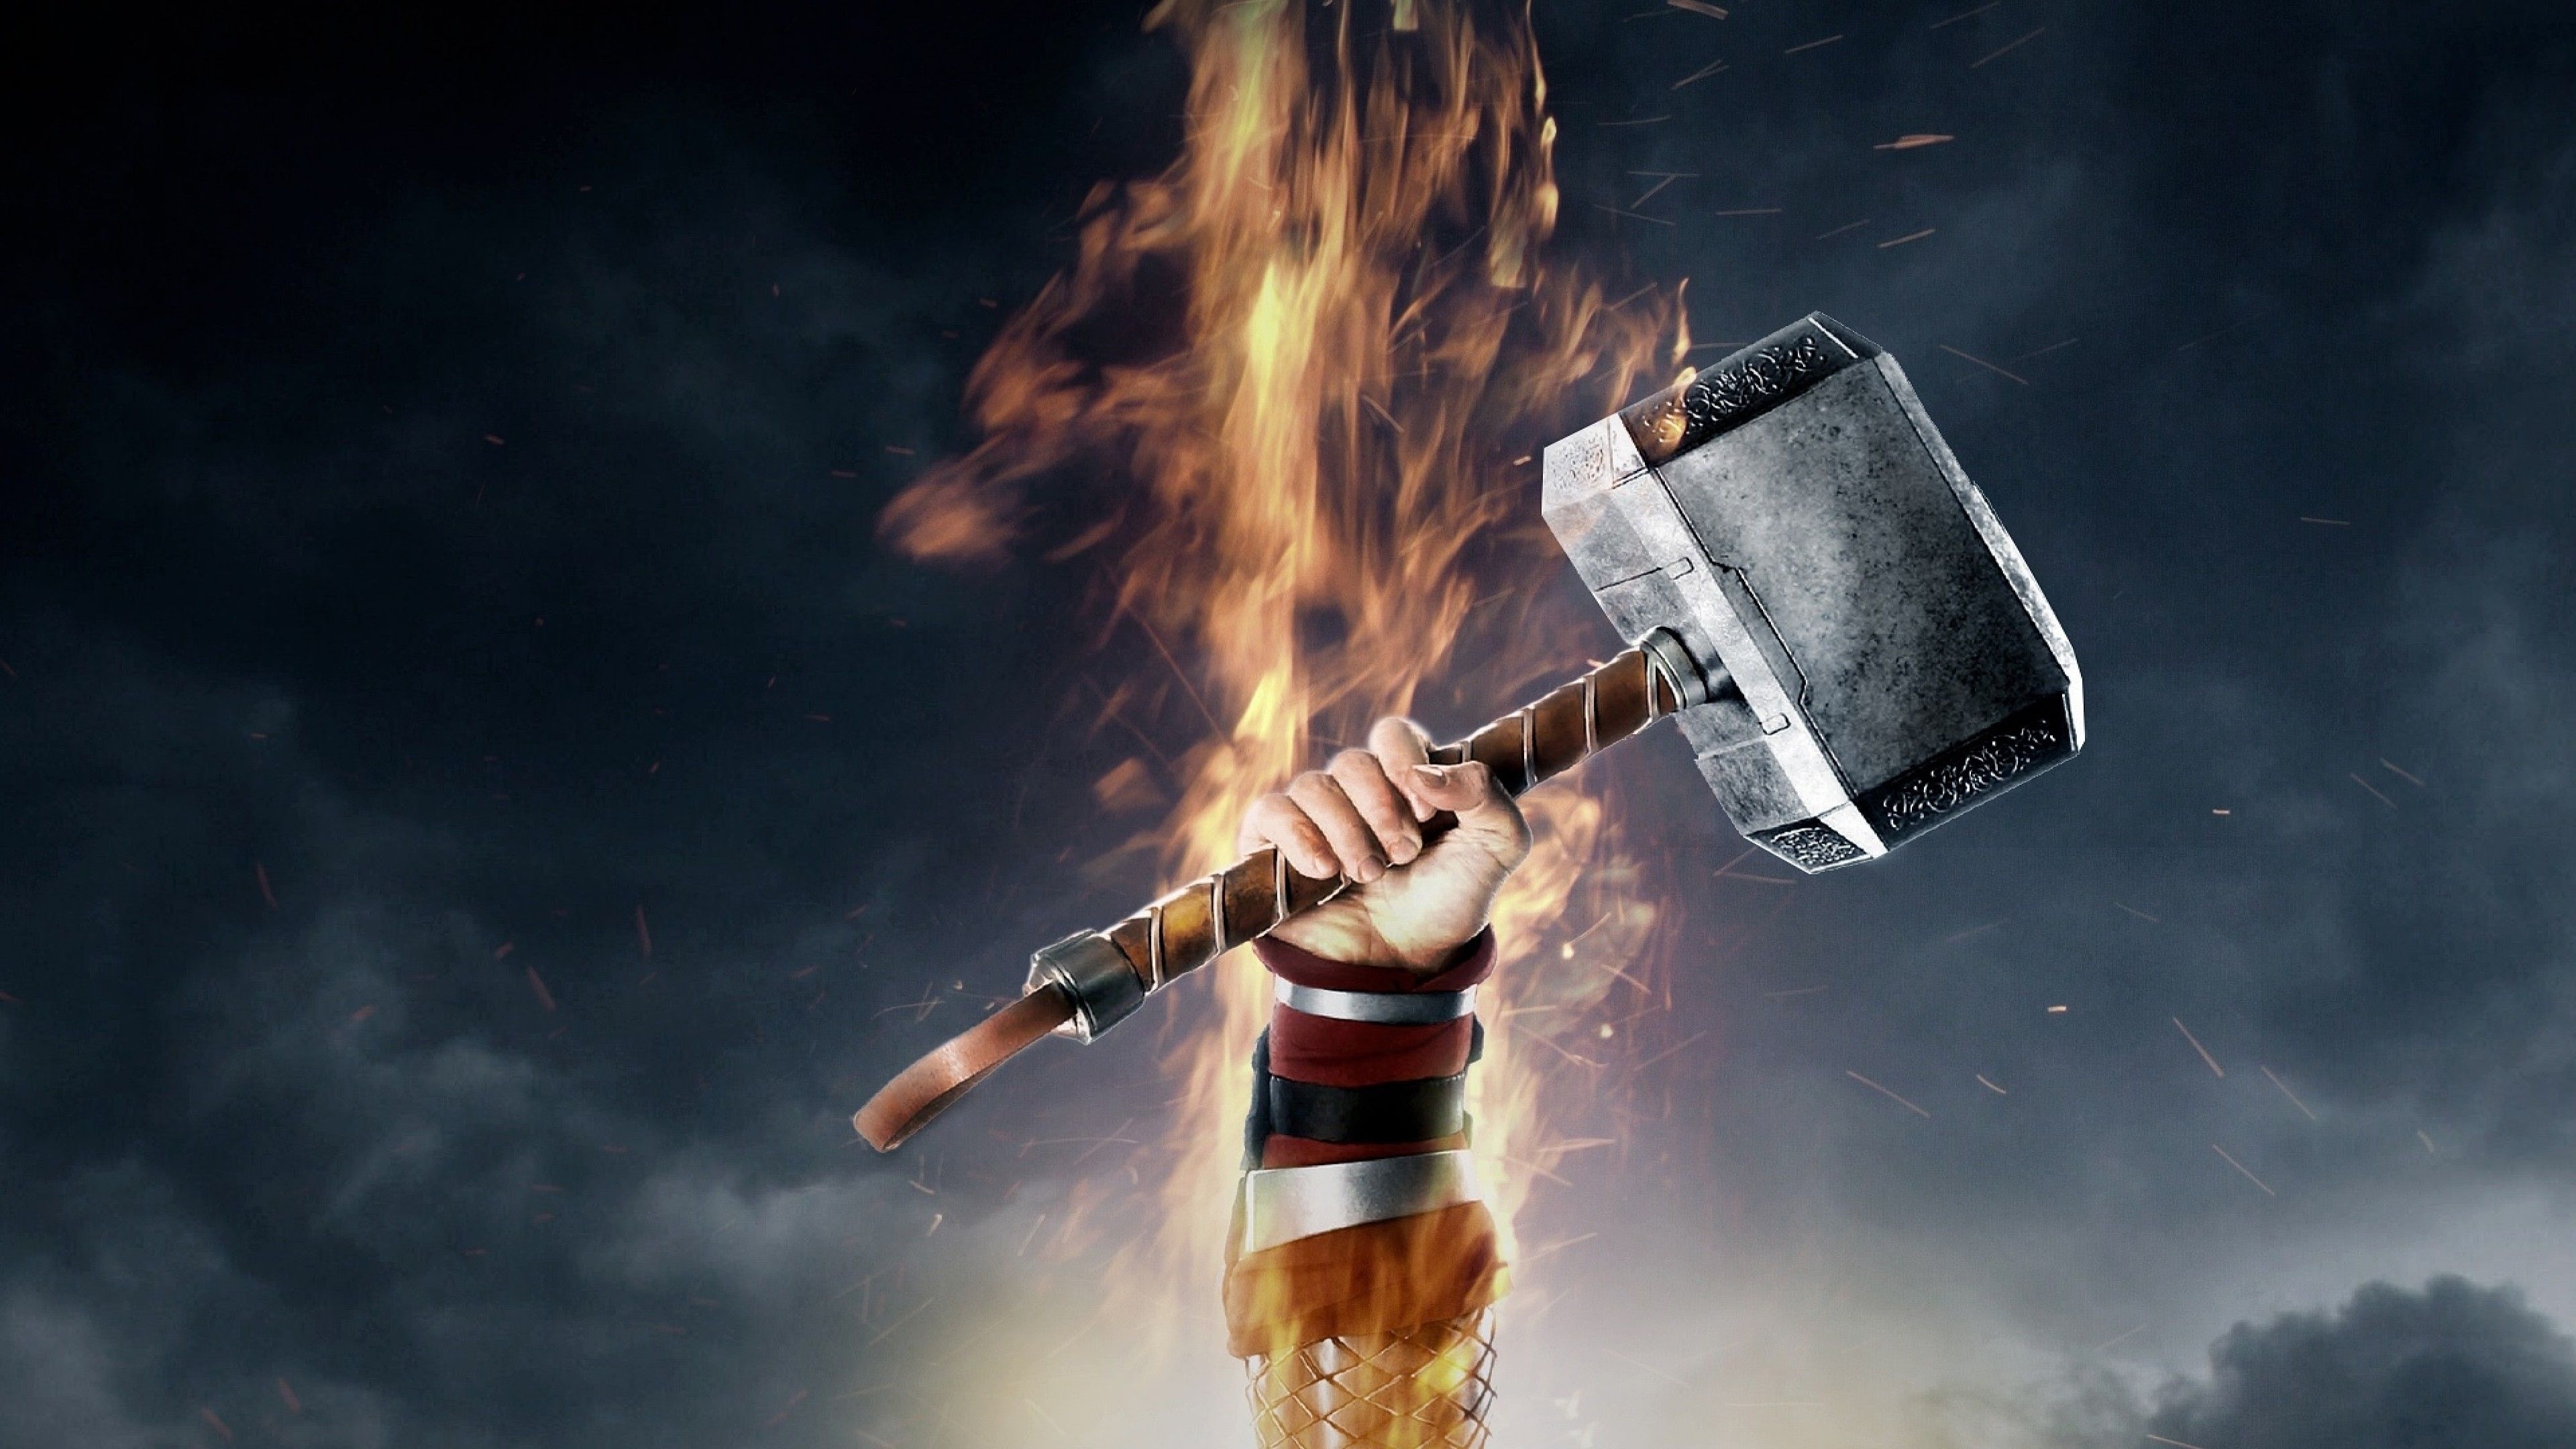 Thors hammer wallpapers, High quality images, Iconic weapon, Mythical artifact, 3840x2160 4K Desktop